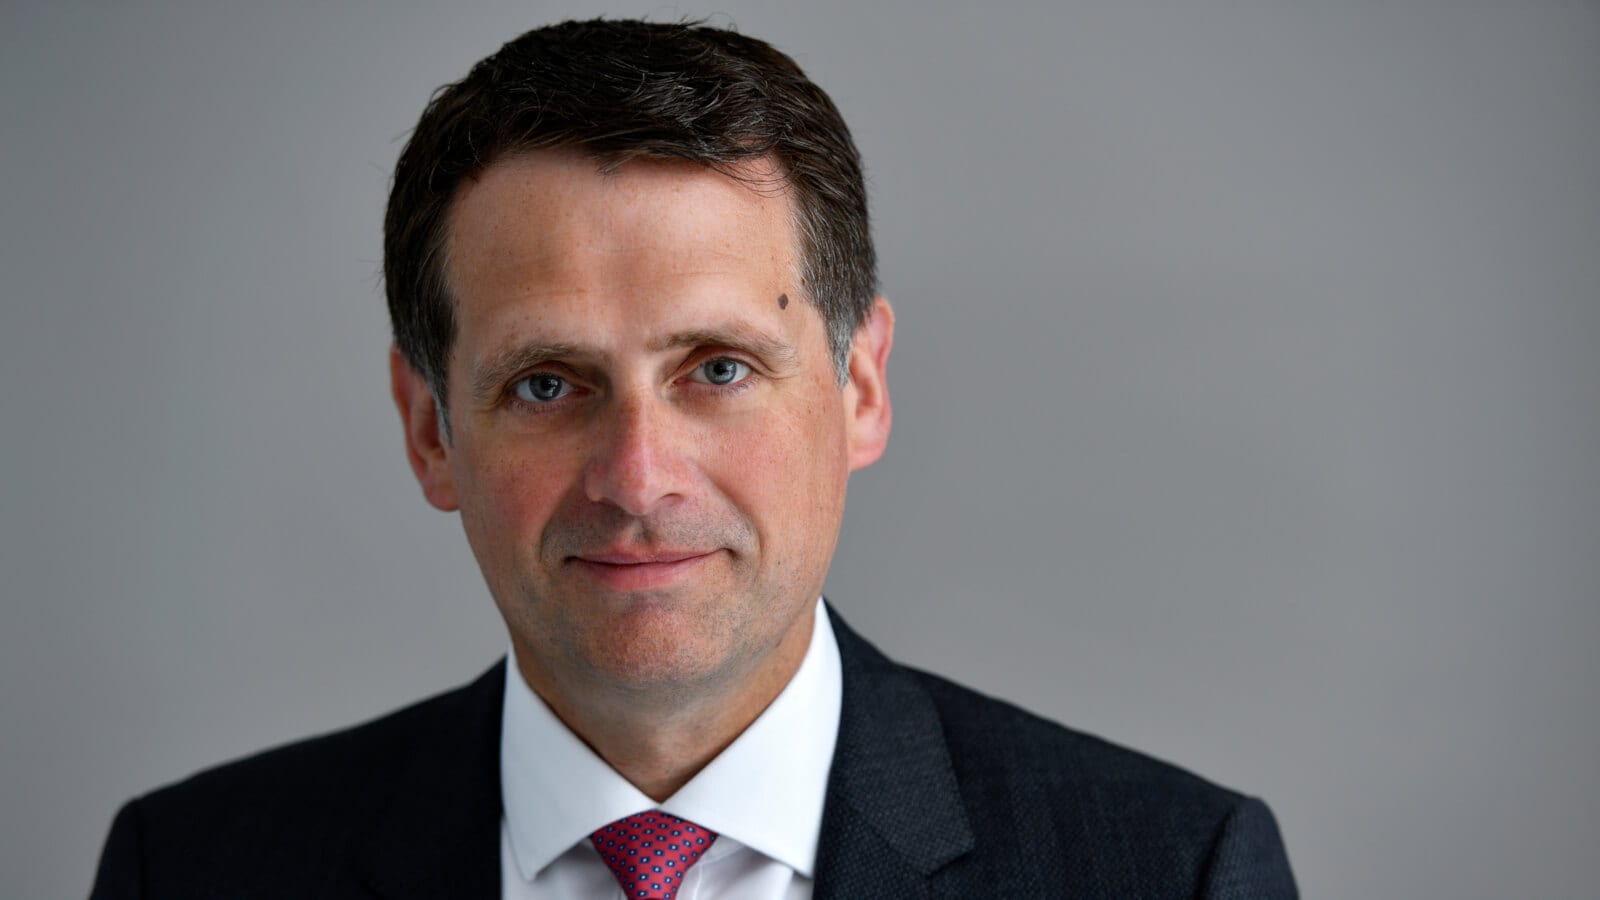 Headshot of Barry O’Dwyer, CEO of Royal London